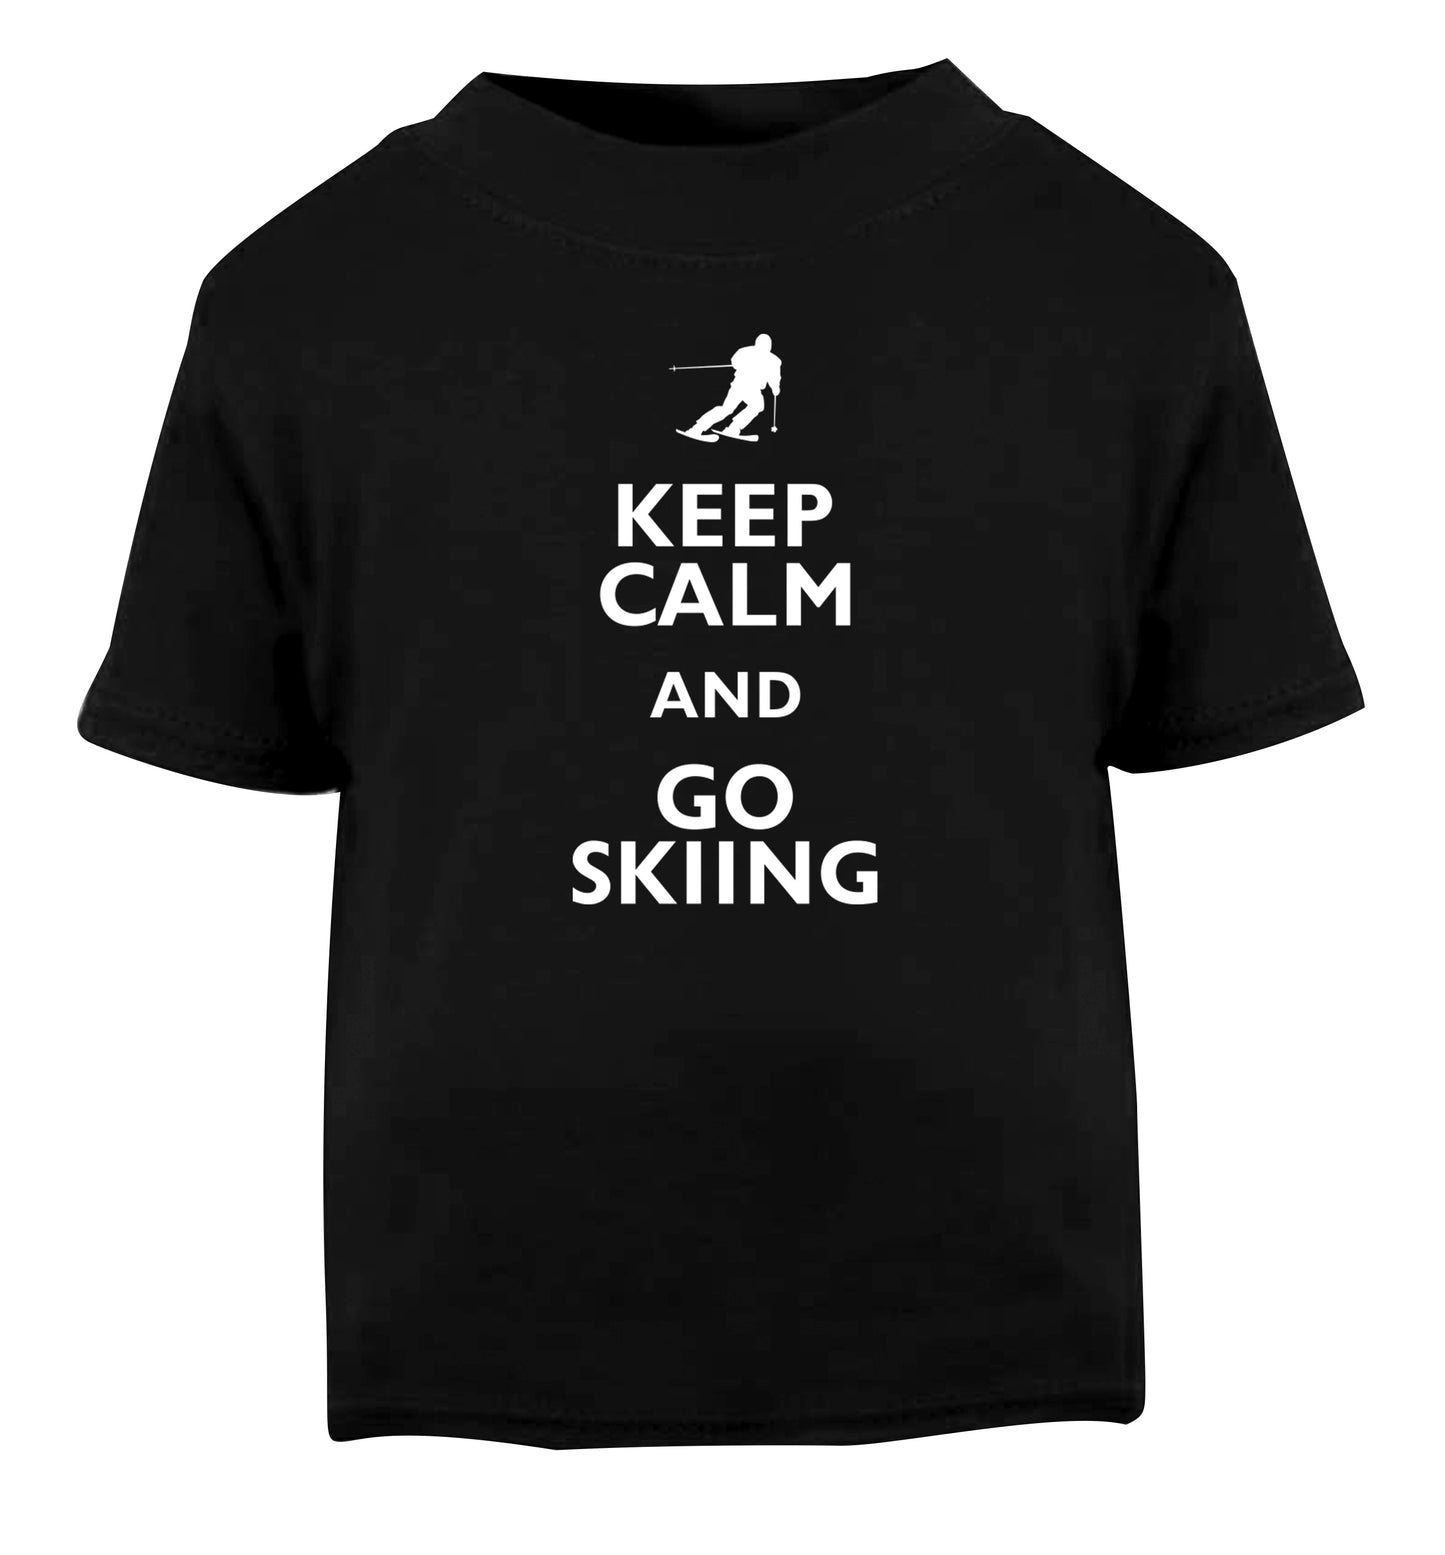 Keep calm and go skiing Black Baby Toddler Tshirt 2 years